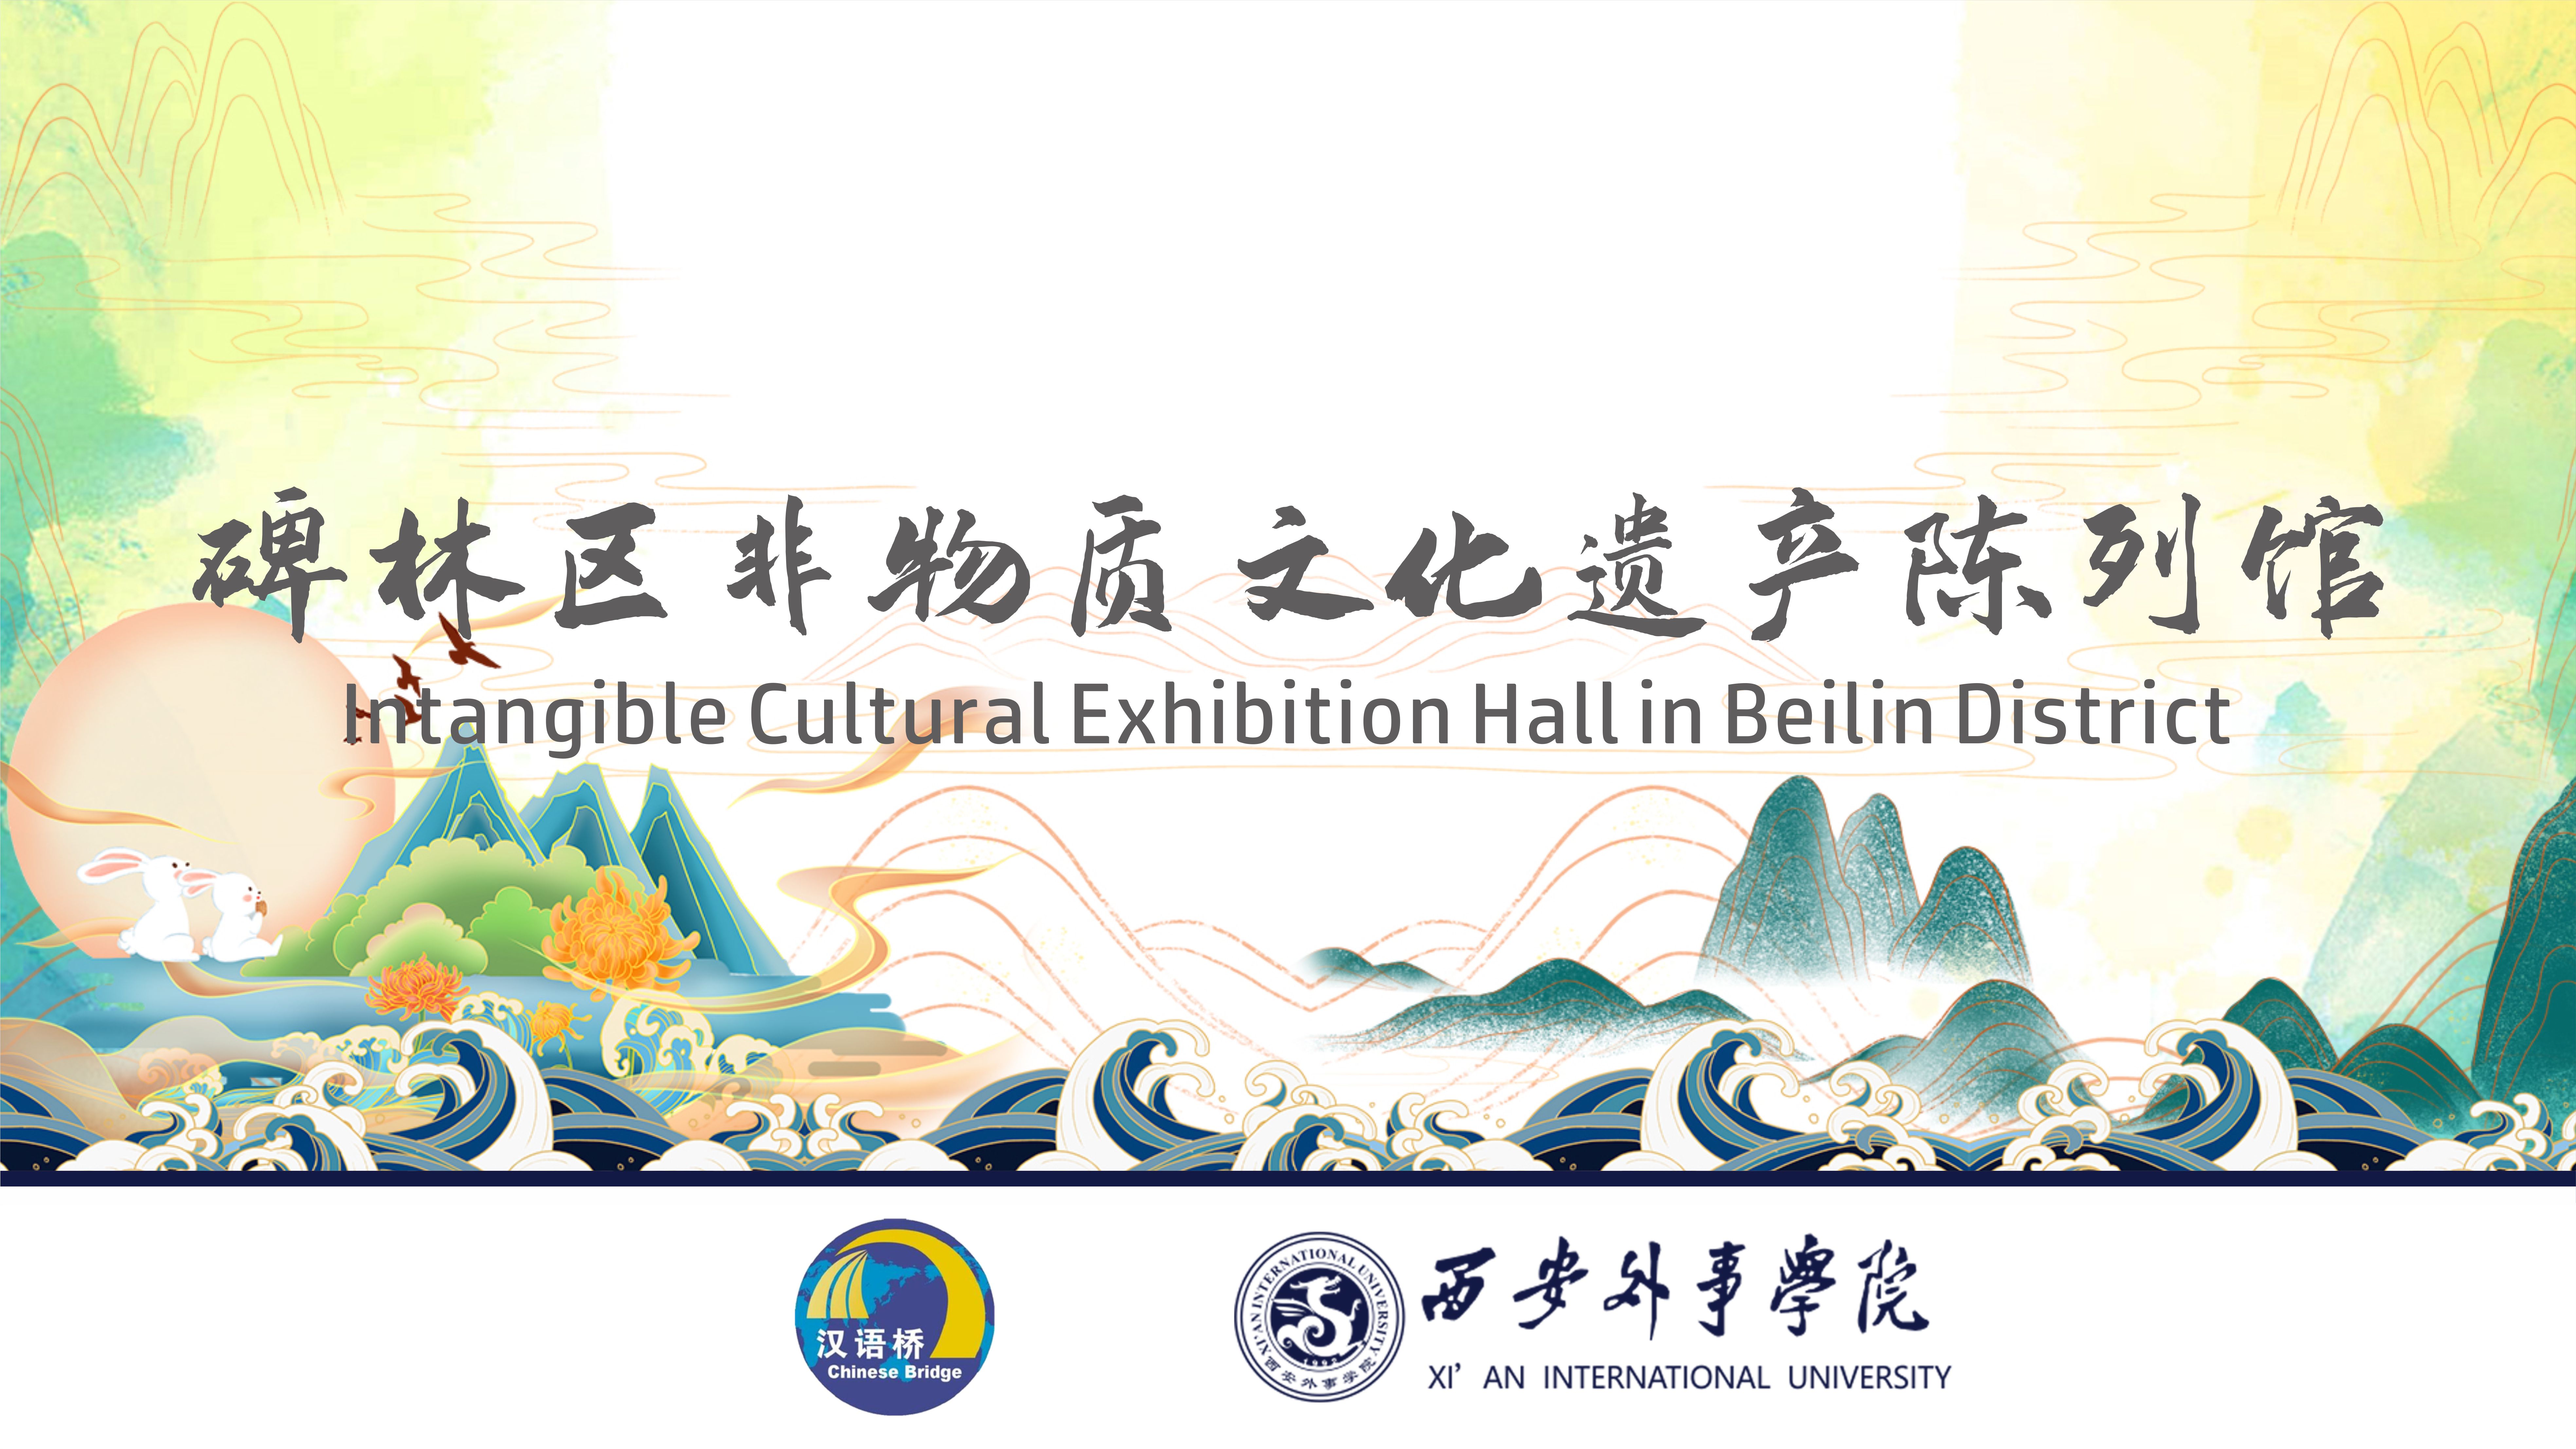 Intangible Cultural Exhibition Hall in Beilin District